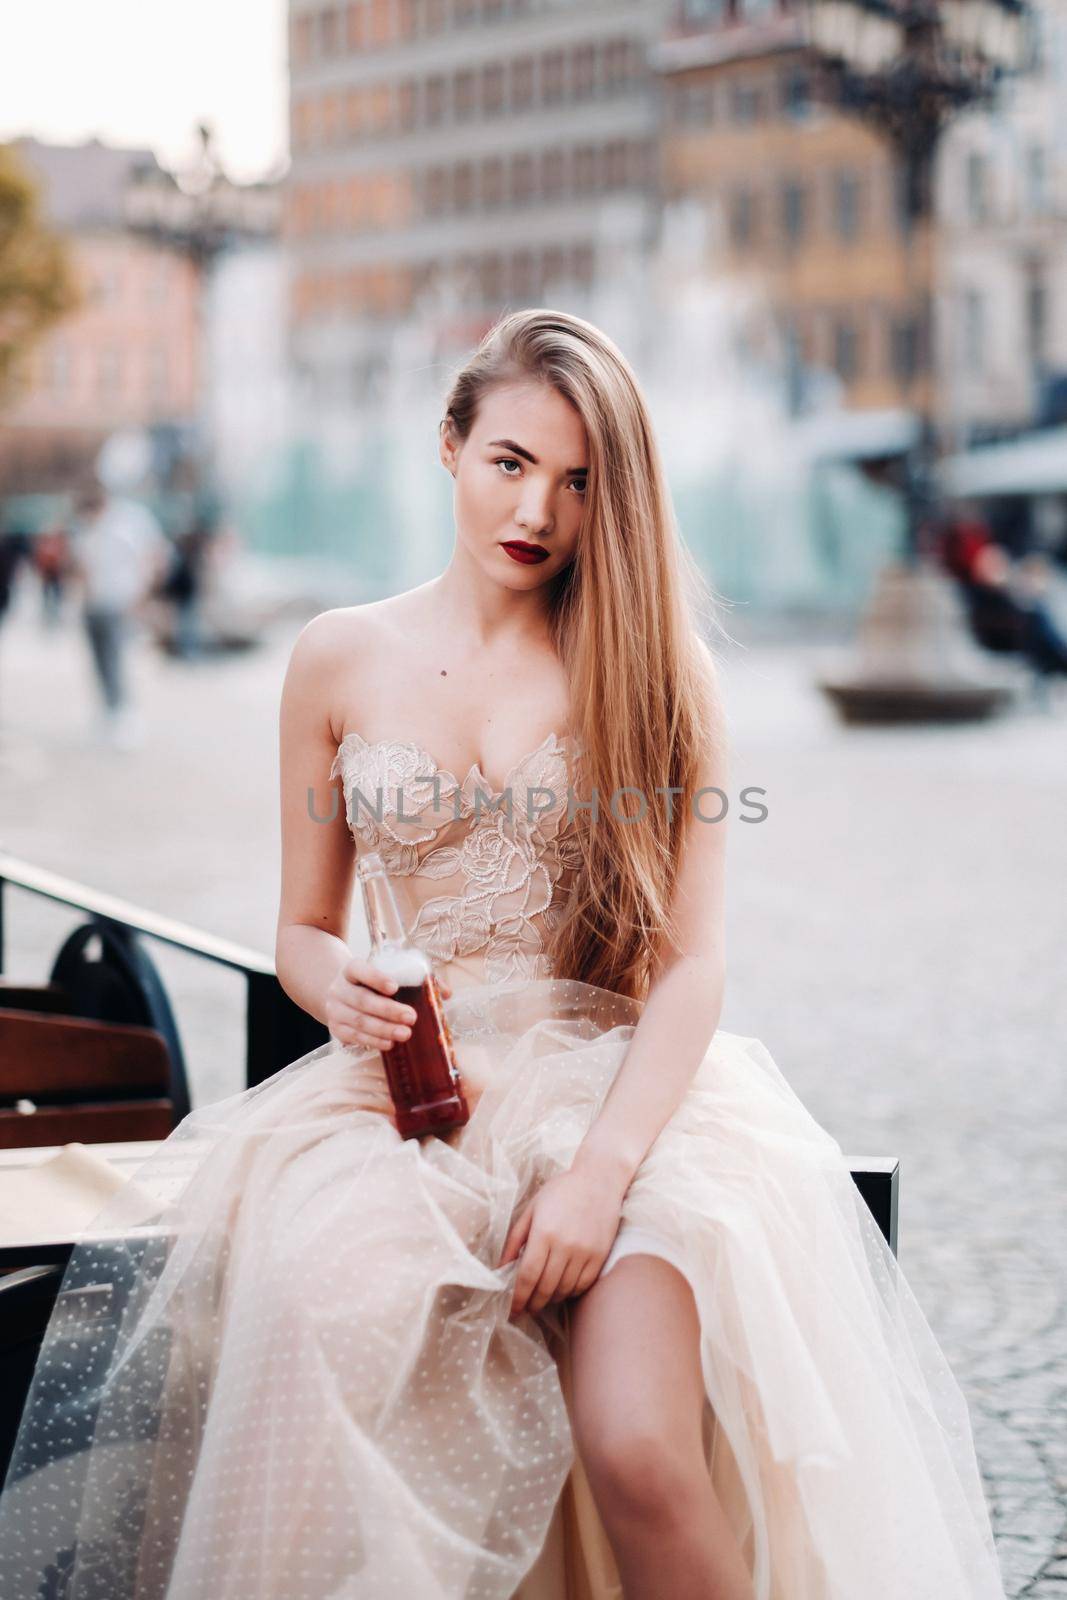 A bride in a wedding dress with long hair and a drink bottle in the Old town of Wroclaw. Wedding photo shoot in the center of an old Polish city.Wroclaw, Poland.